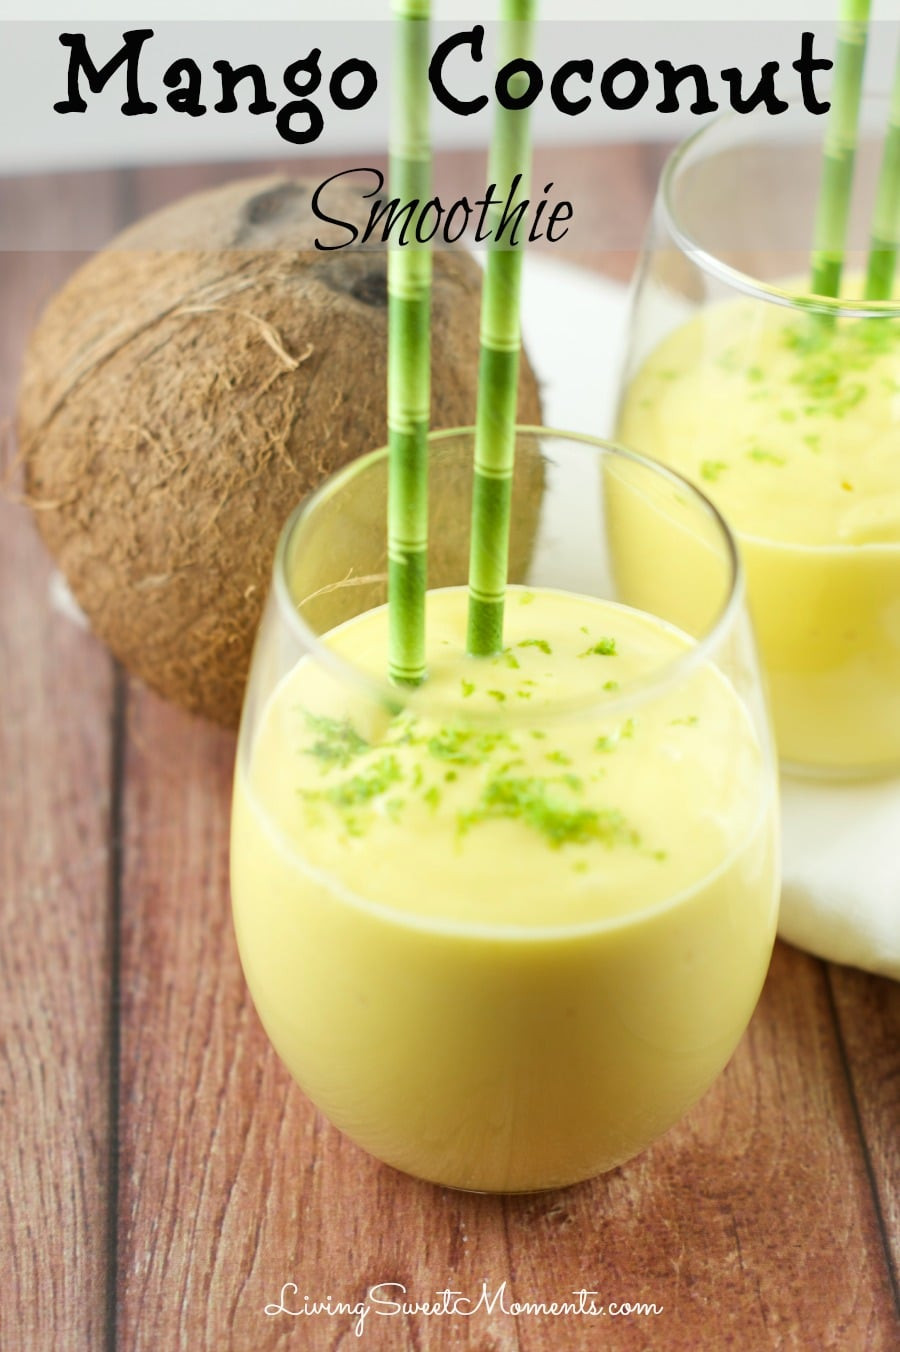 Coconut Smoothie Recipes
 Mango Coconut Smoothie Living Sweet Moments